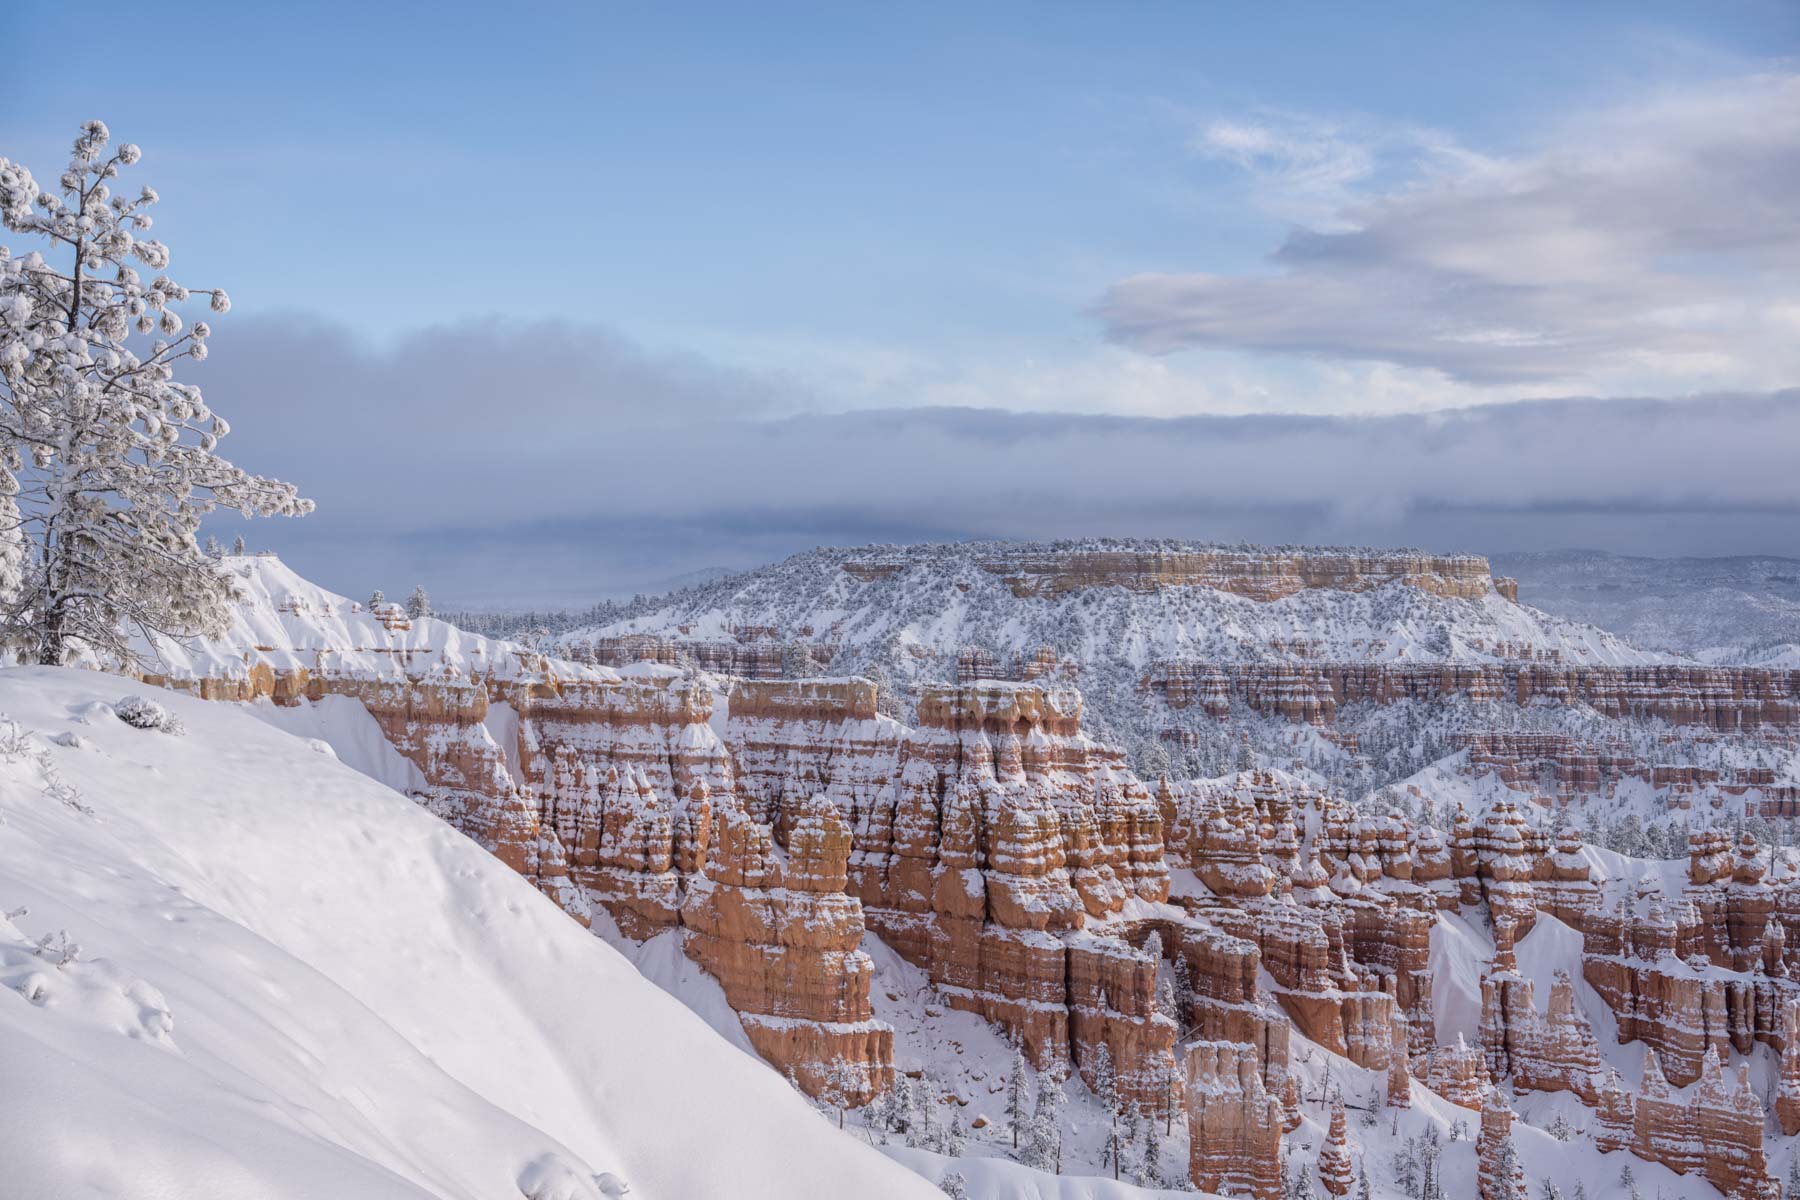 Bryce Canyon covered in snow as seen from Sunset Point